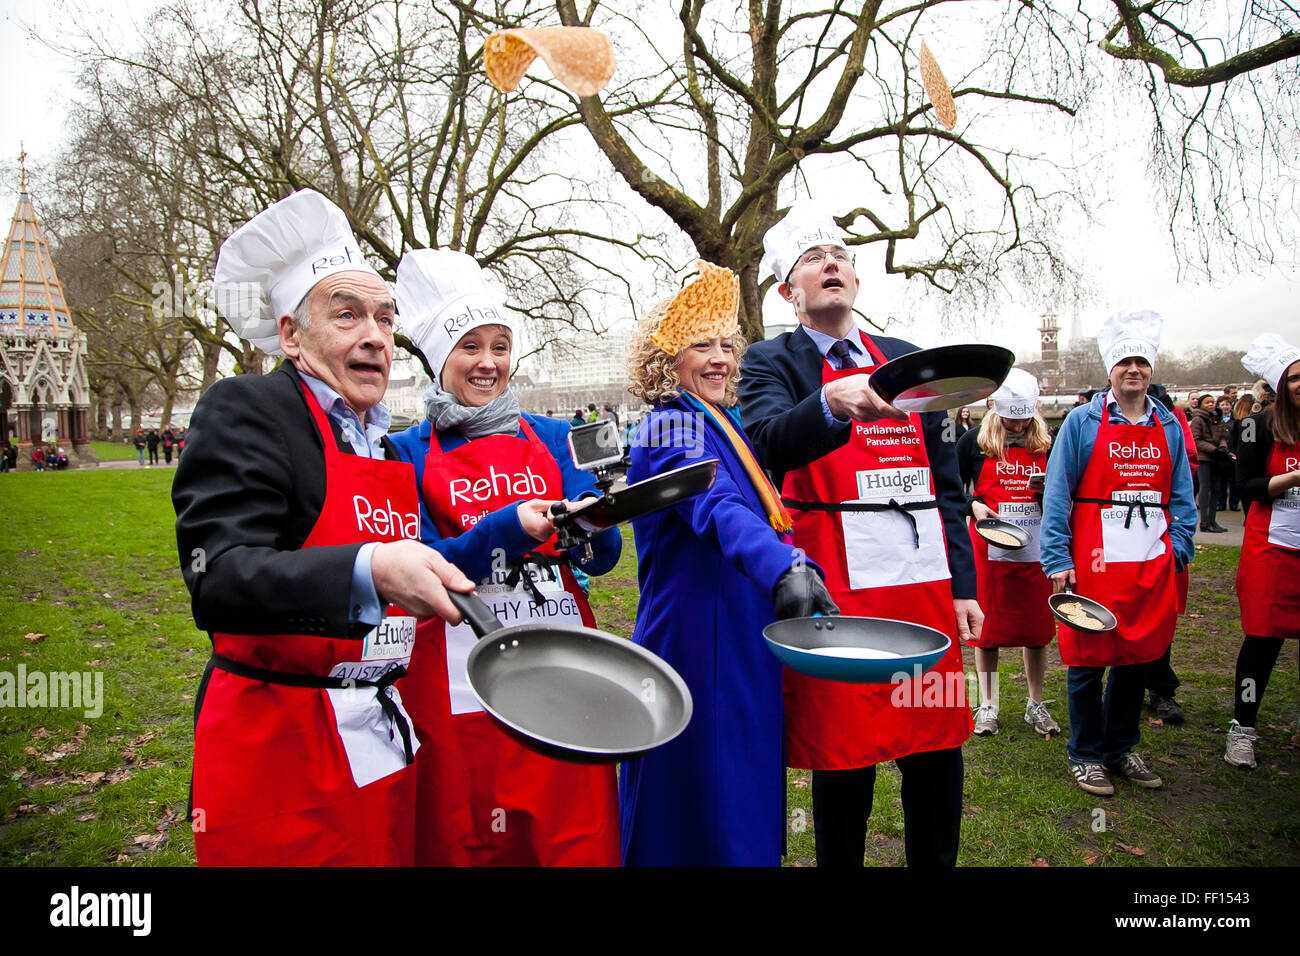 Westminster, London, United Kingdom. February 9th, 2016 -  The media team - last year's winners of the annual Parliamentary pancake race pose for photos while tossing pancakes Credit:  Dinendra Haria/Alamy Live News Stock Photo